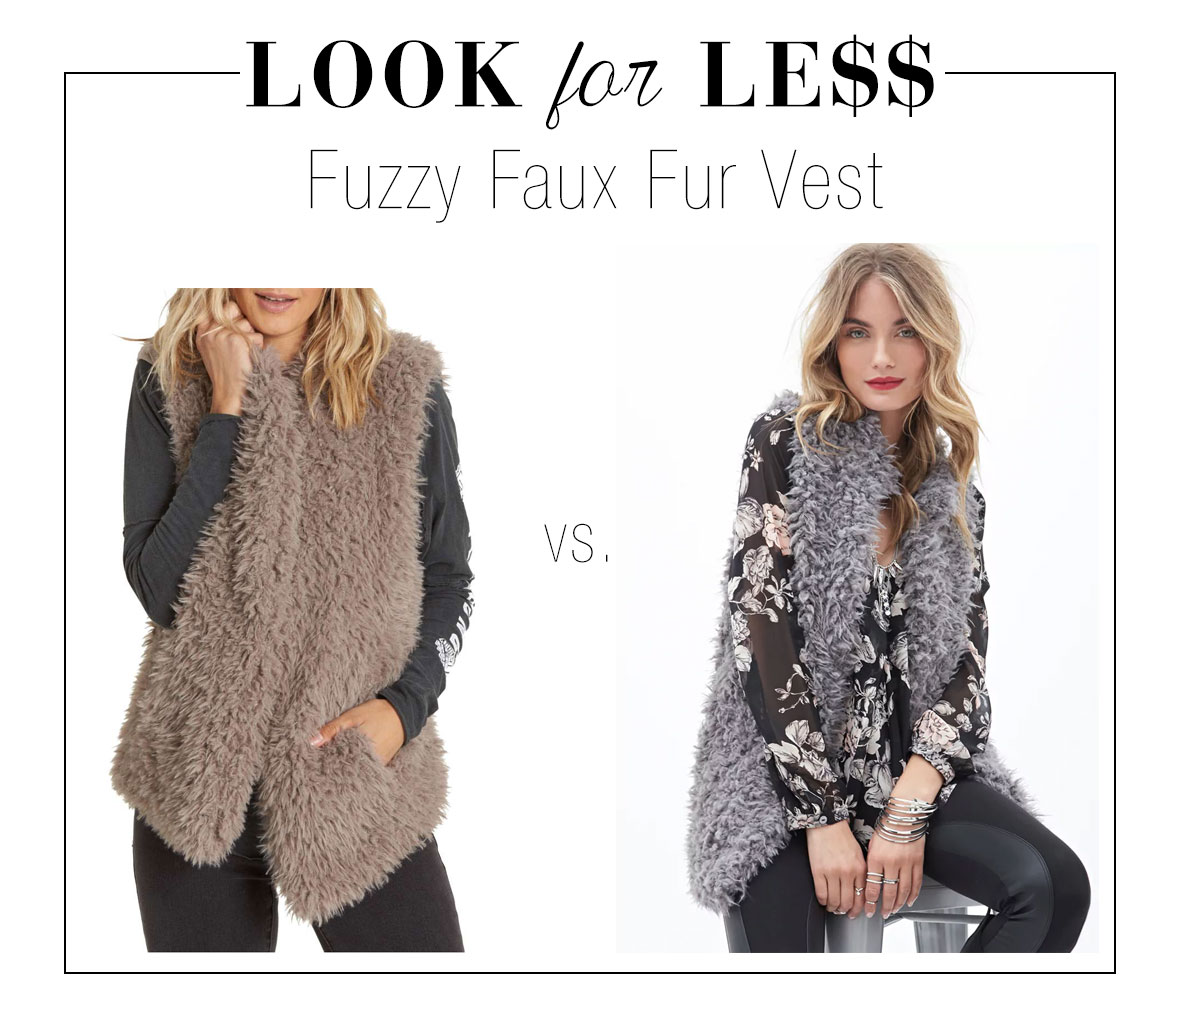 This faux fur vest is the perfect cozy layering piece for fall and winter.